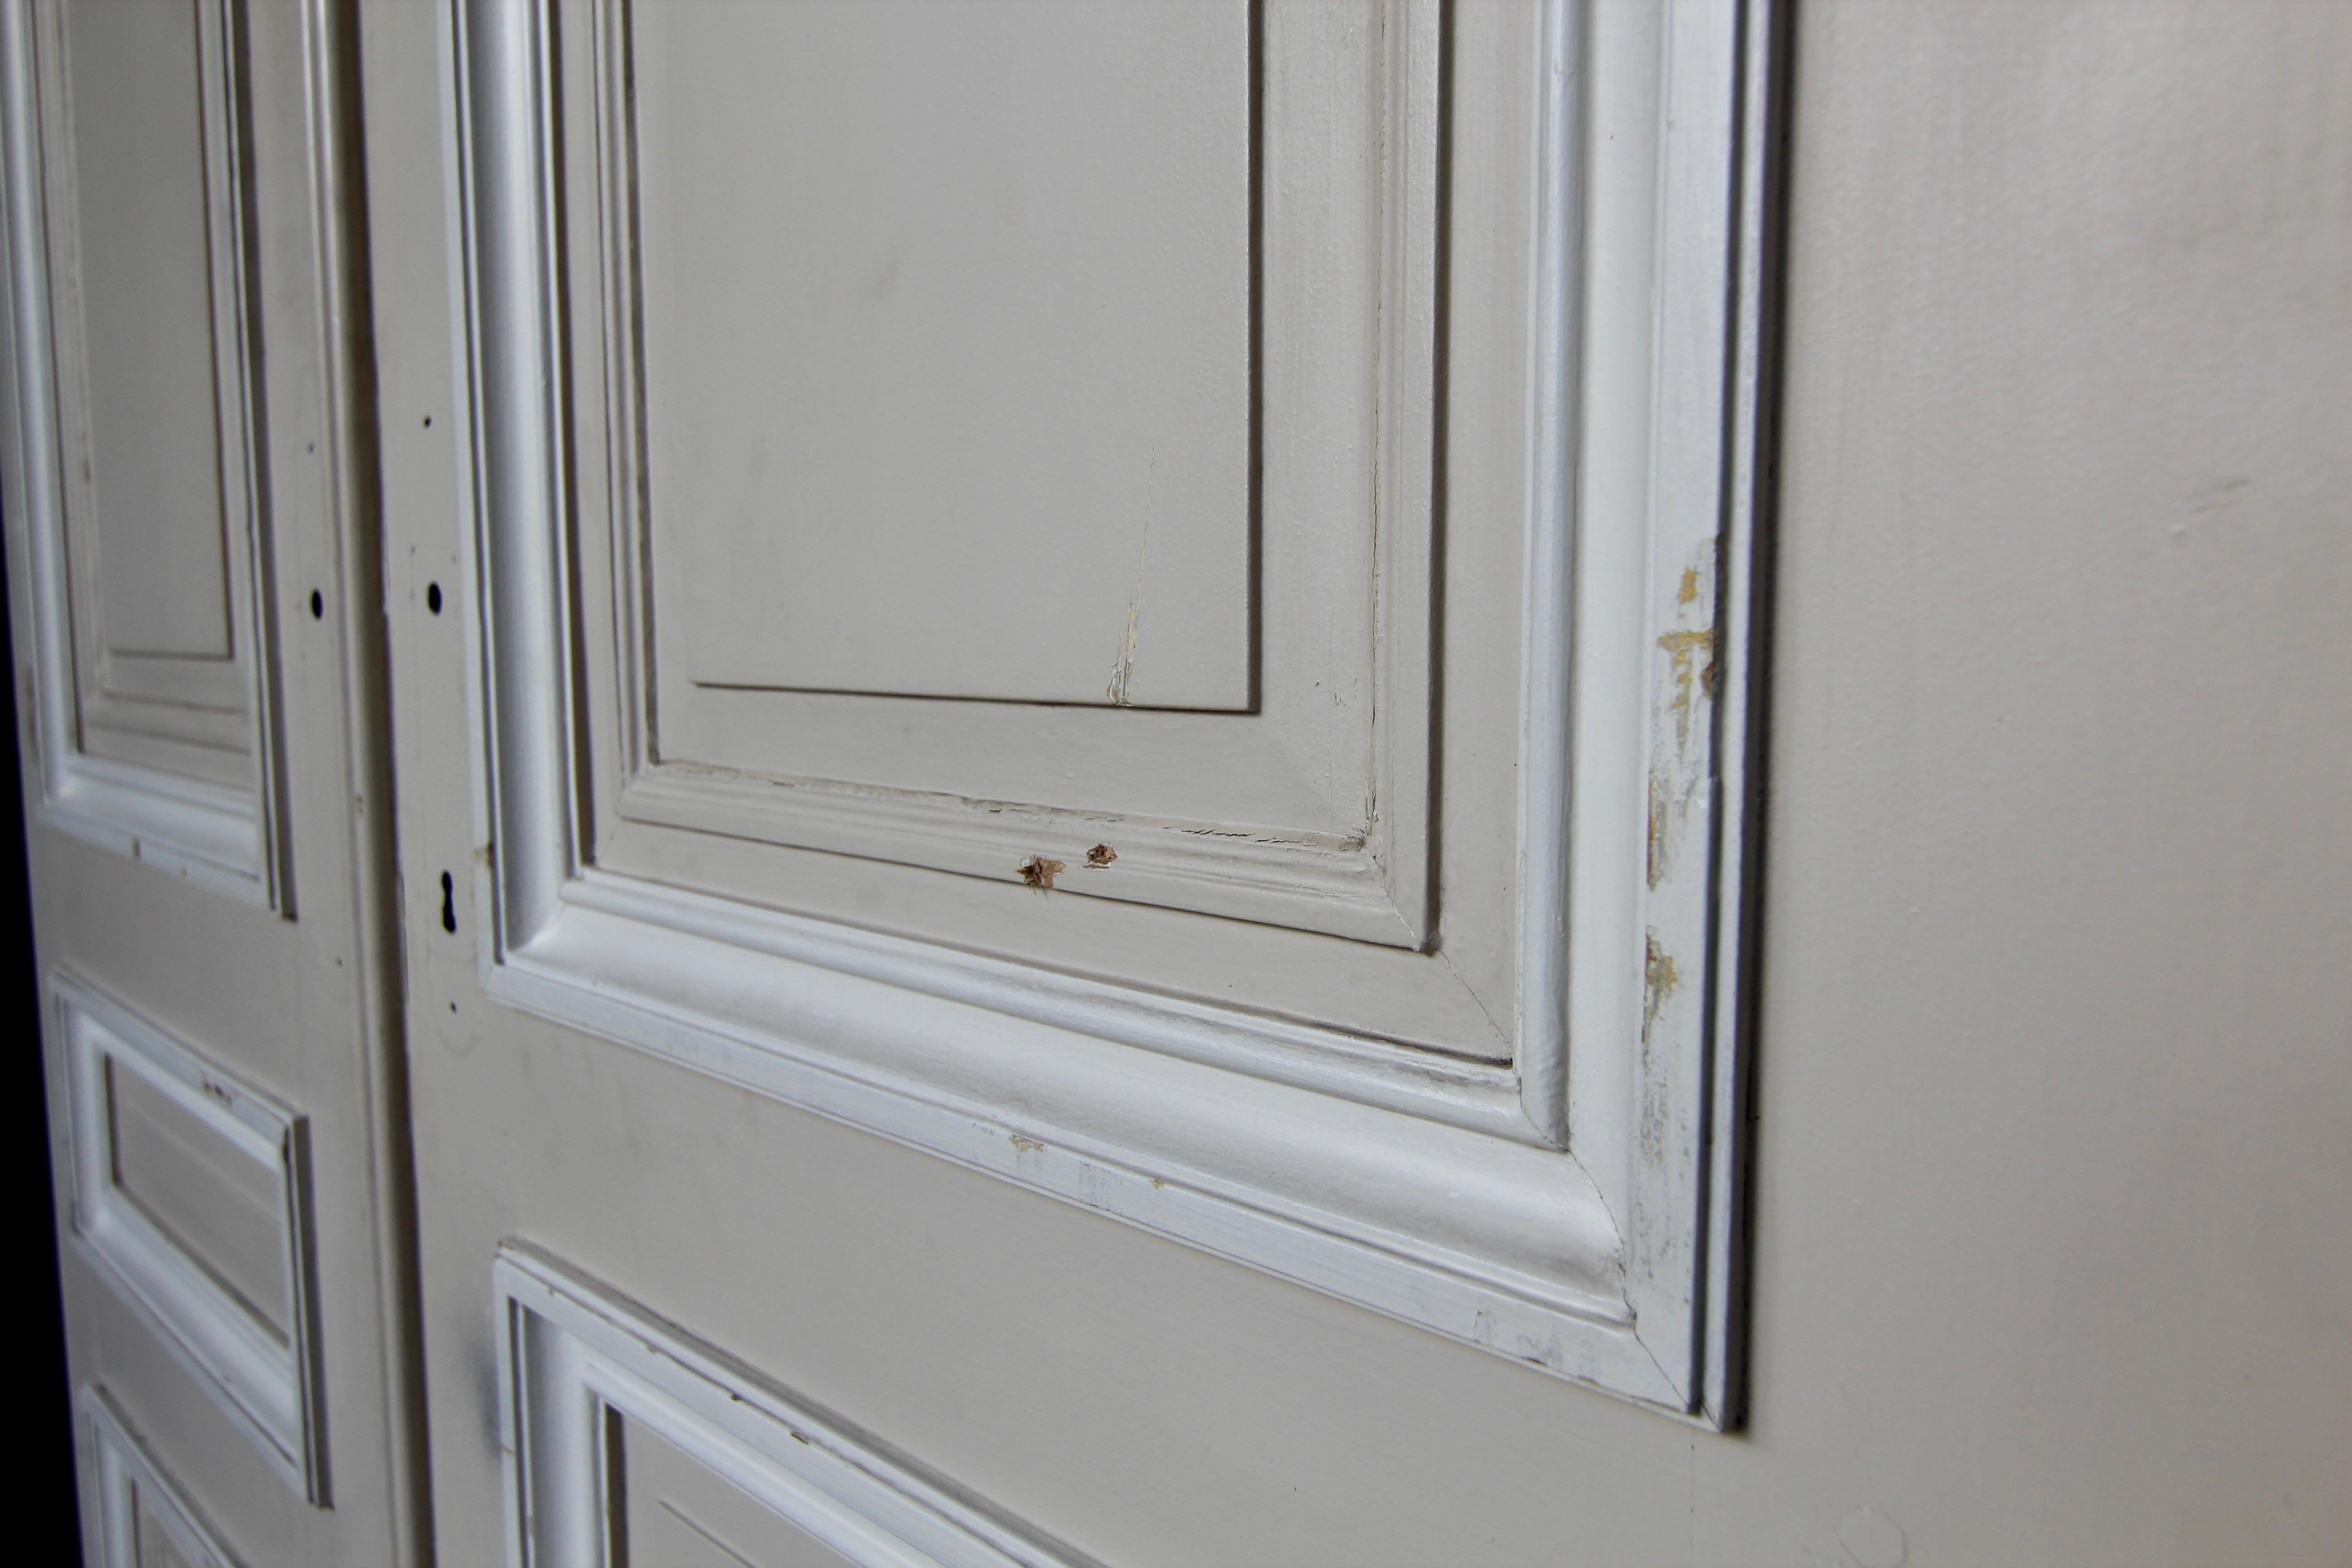 Early 20th Century French Painted Oak Double Door For Sale 6